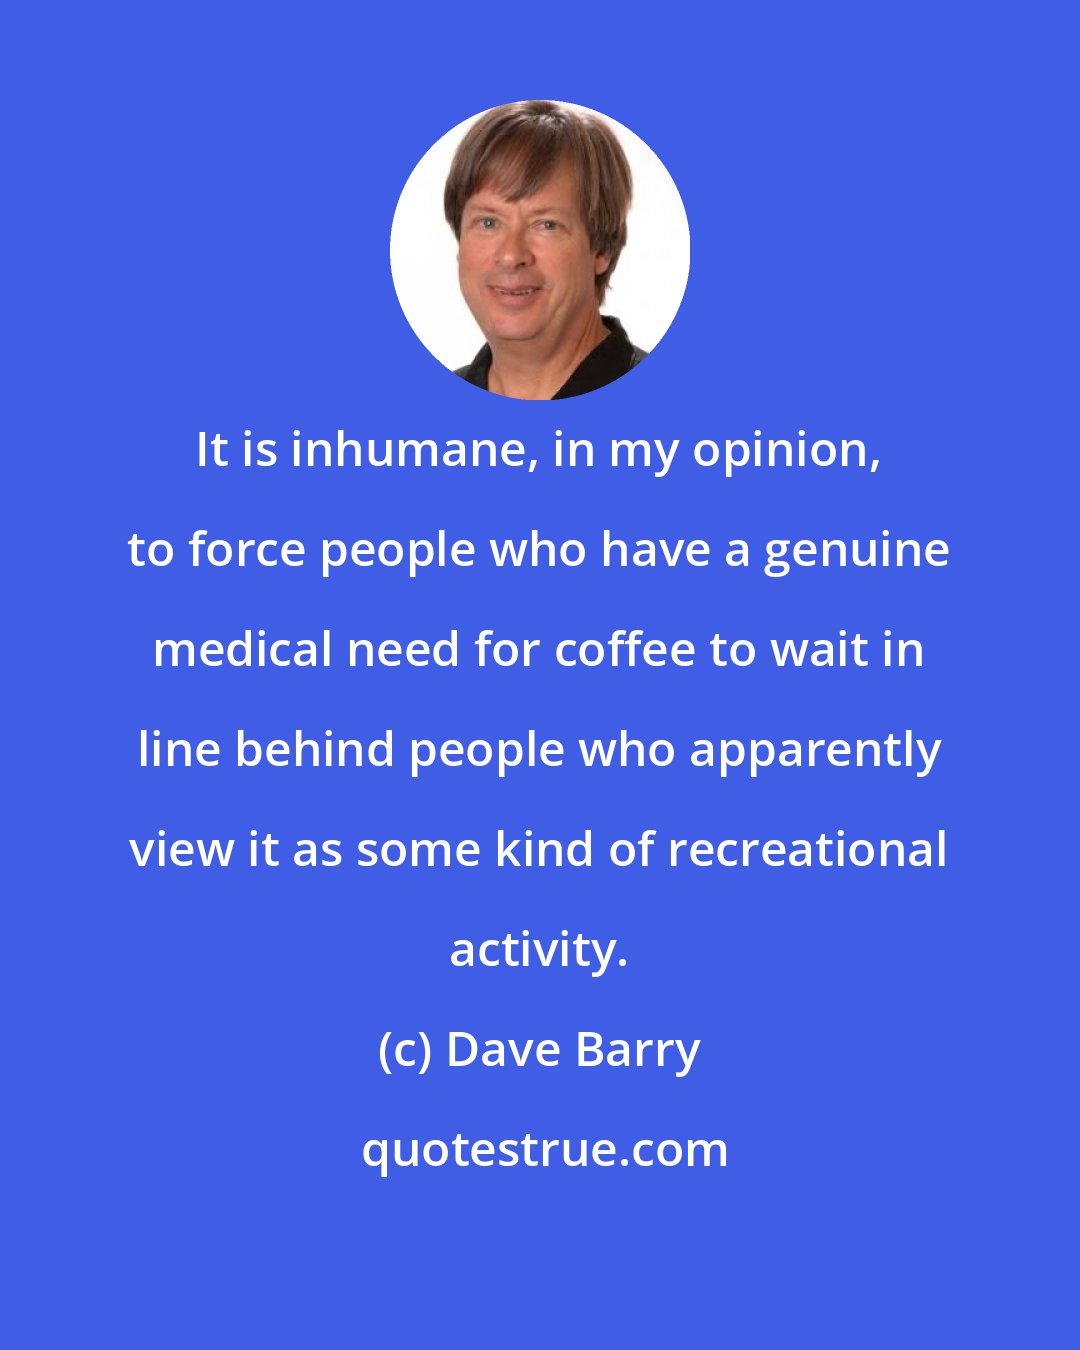 Dave Barry: It is inhumane, in my opinion, to force people who have a genuine medical need for coffee to wait in line behind people who apparently view it as some kind of recreational activity.